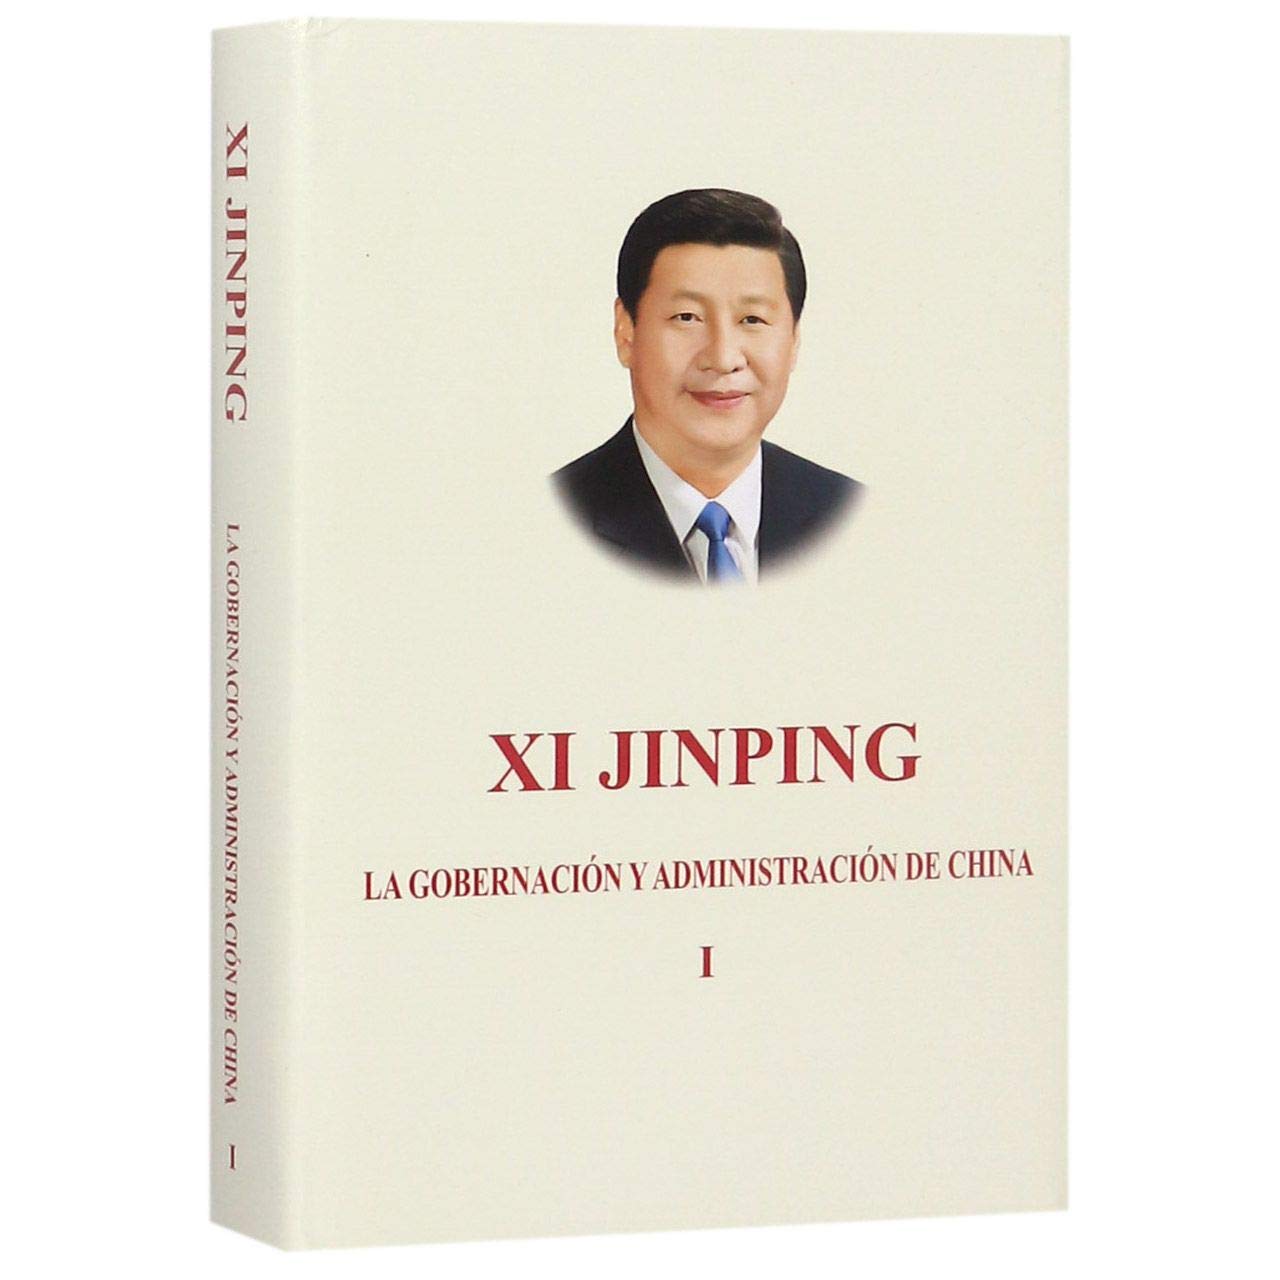 Xi Jinping: The Governance of China Vol. 1 (Spanish) - Hardcover